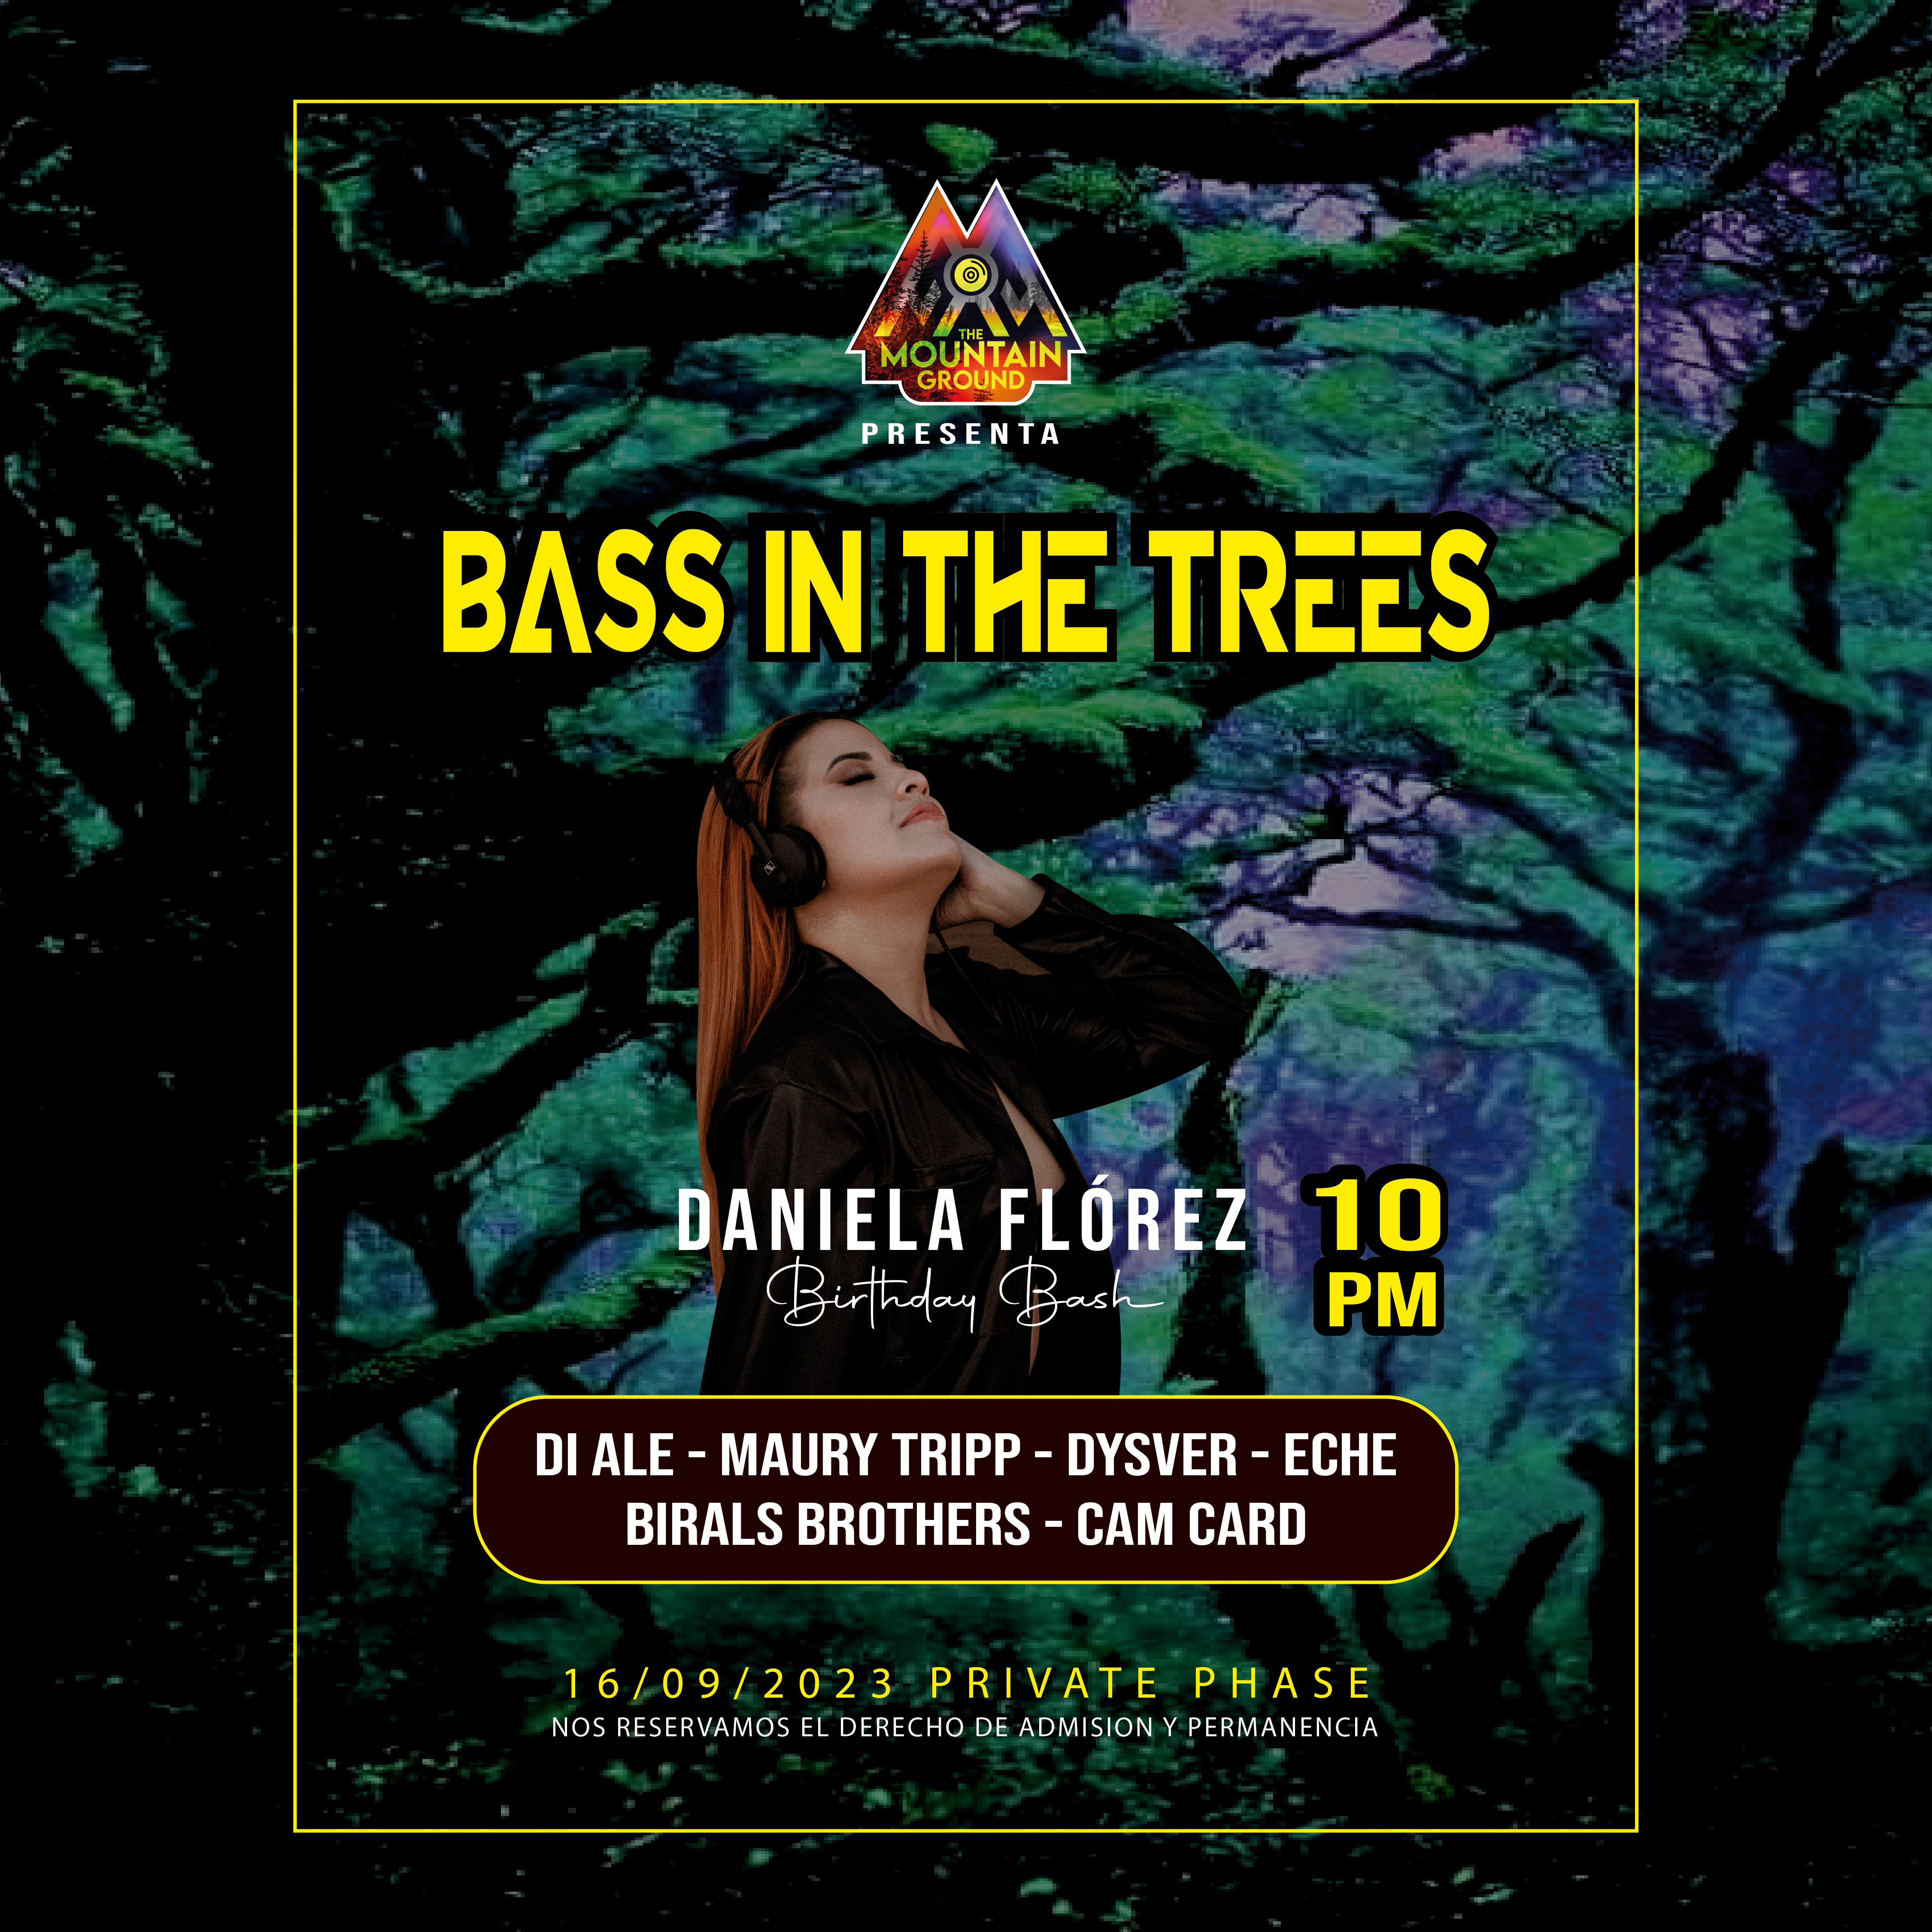 Bass in the trees - Página frontal